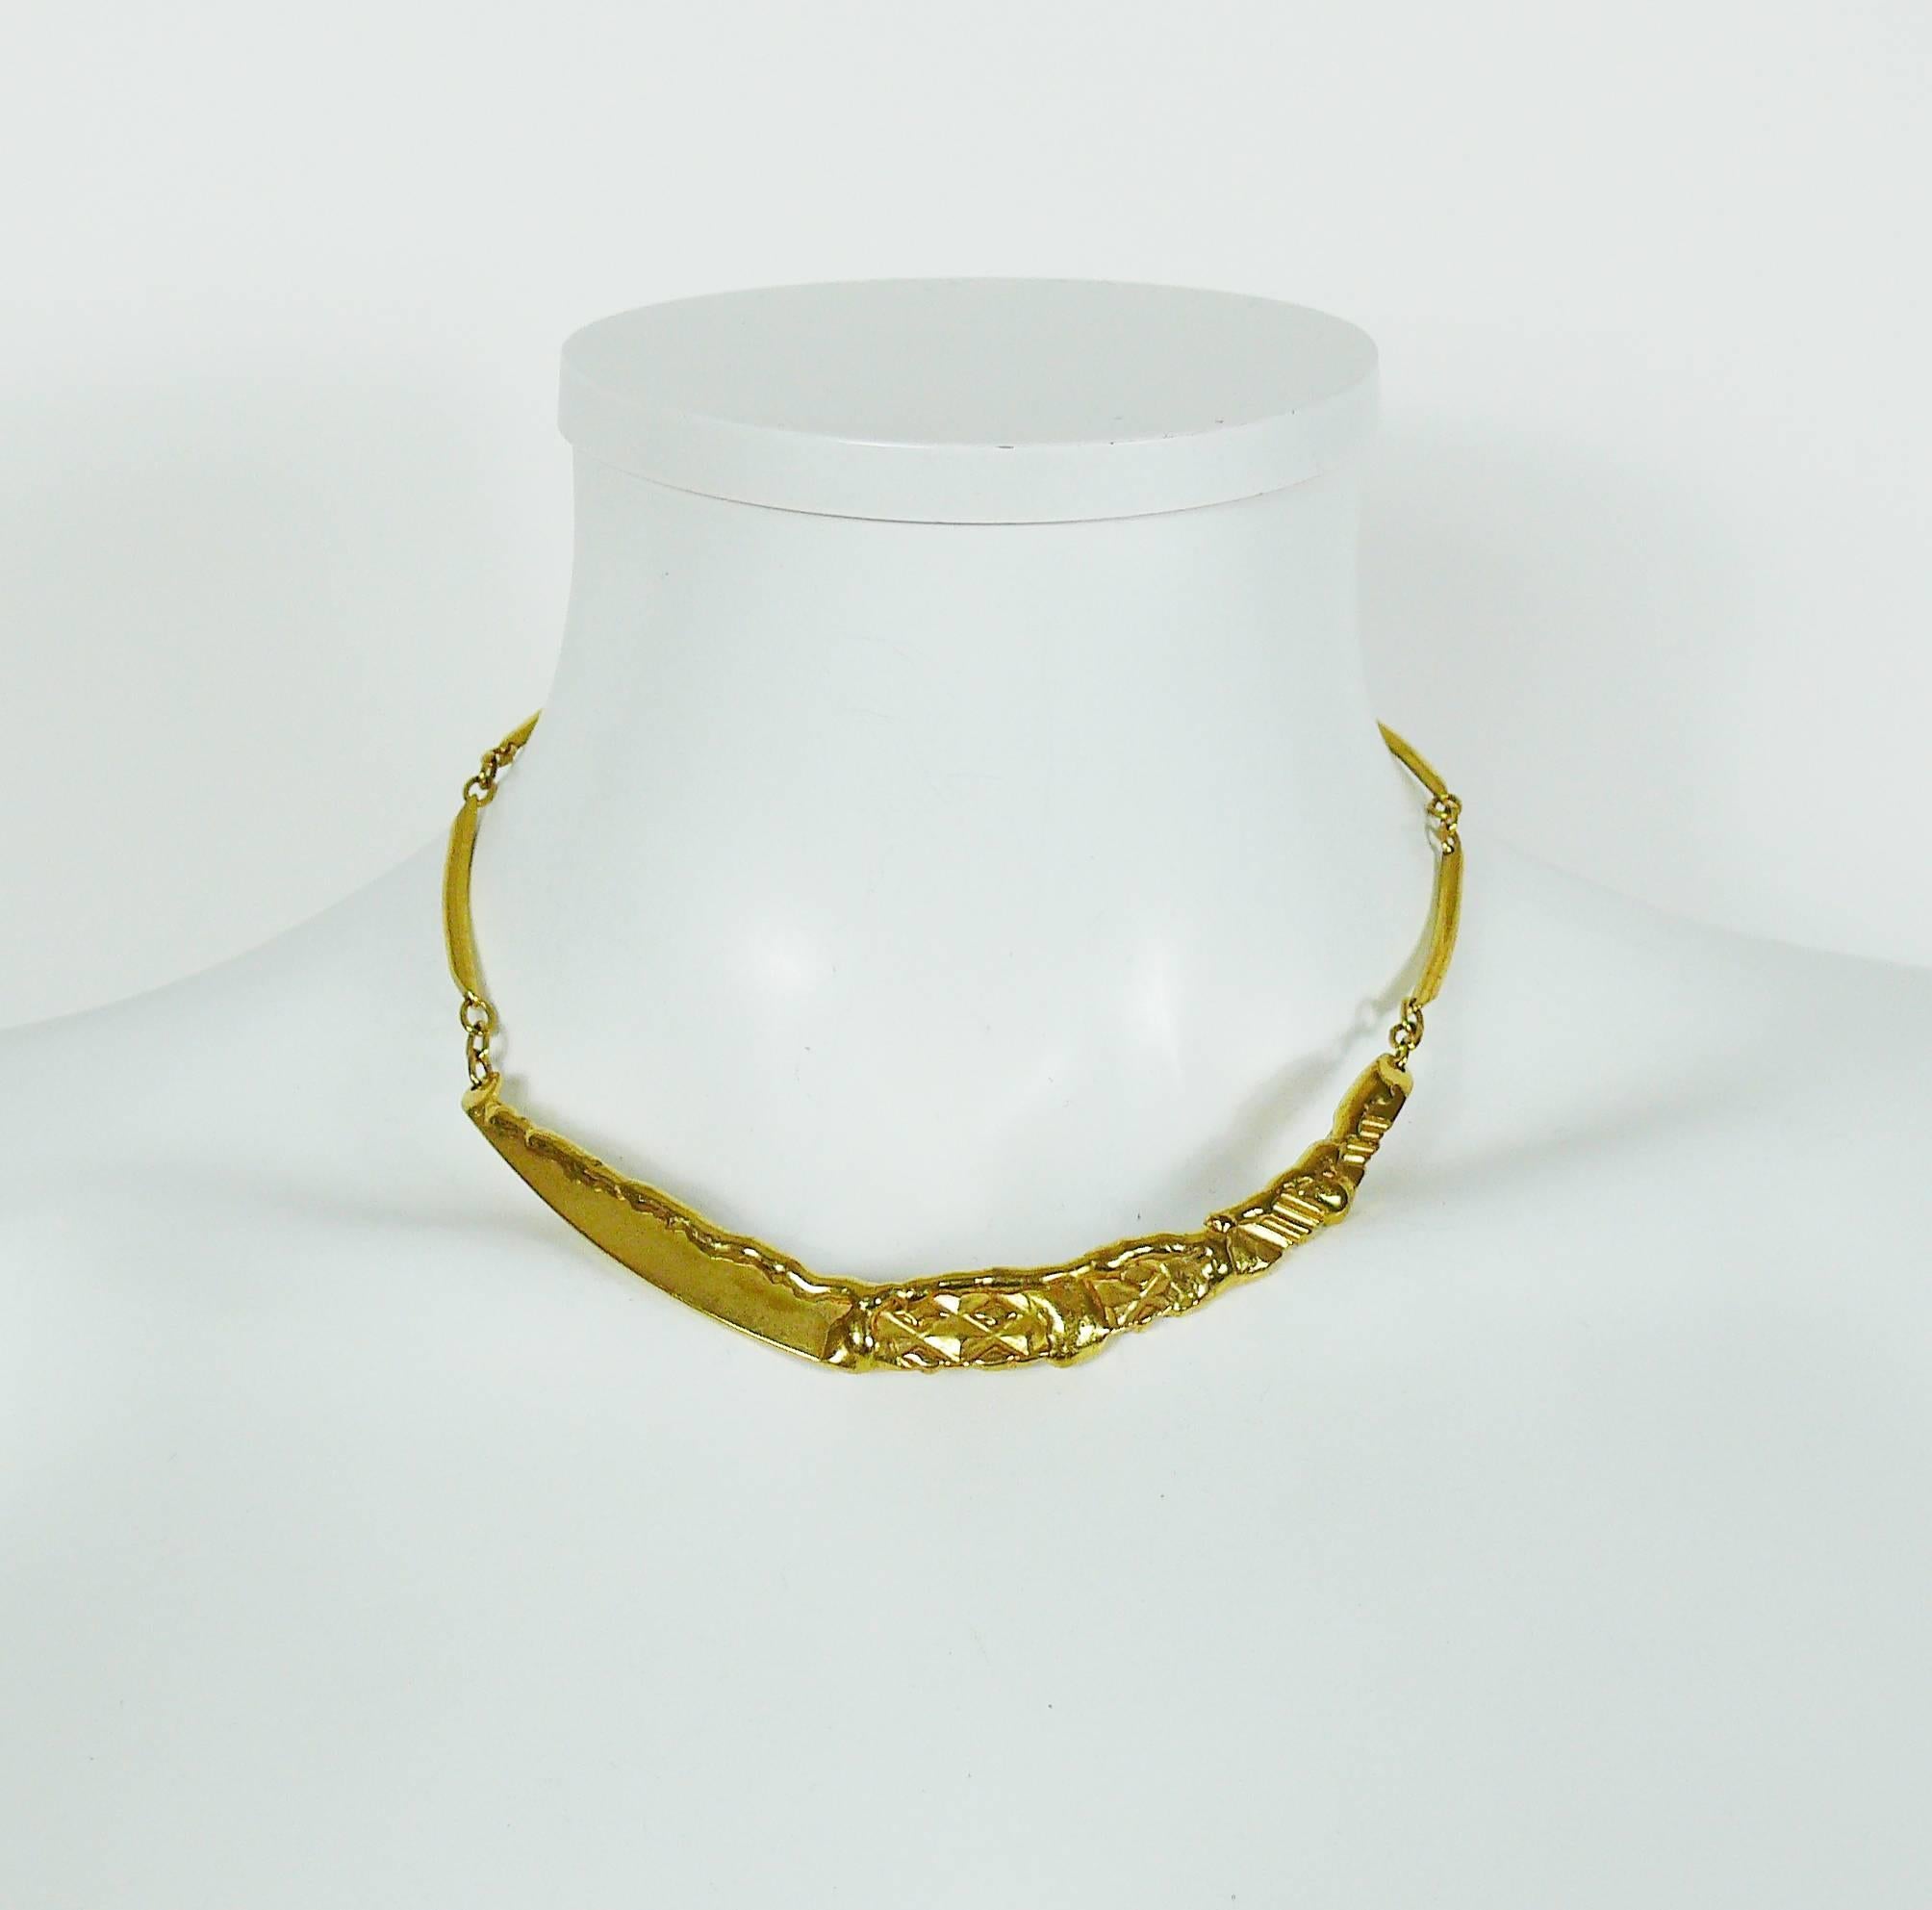 CHRISTIAN LACROIX vintage brutalist gold toned collar necklace.

Spring clasp closure.

Embossed with CL monogram.

Indicative measurements : inner circumference approx. 38.64 cm (15.21 inches) / max width approx. 1 cm (0.39 inch).

JEWELRY